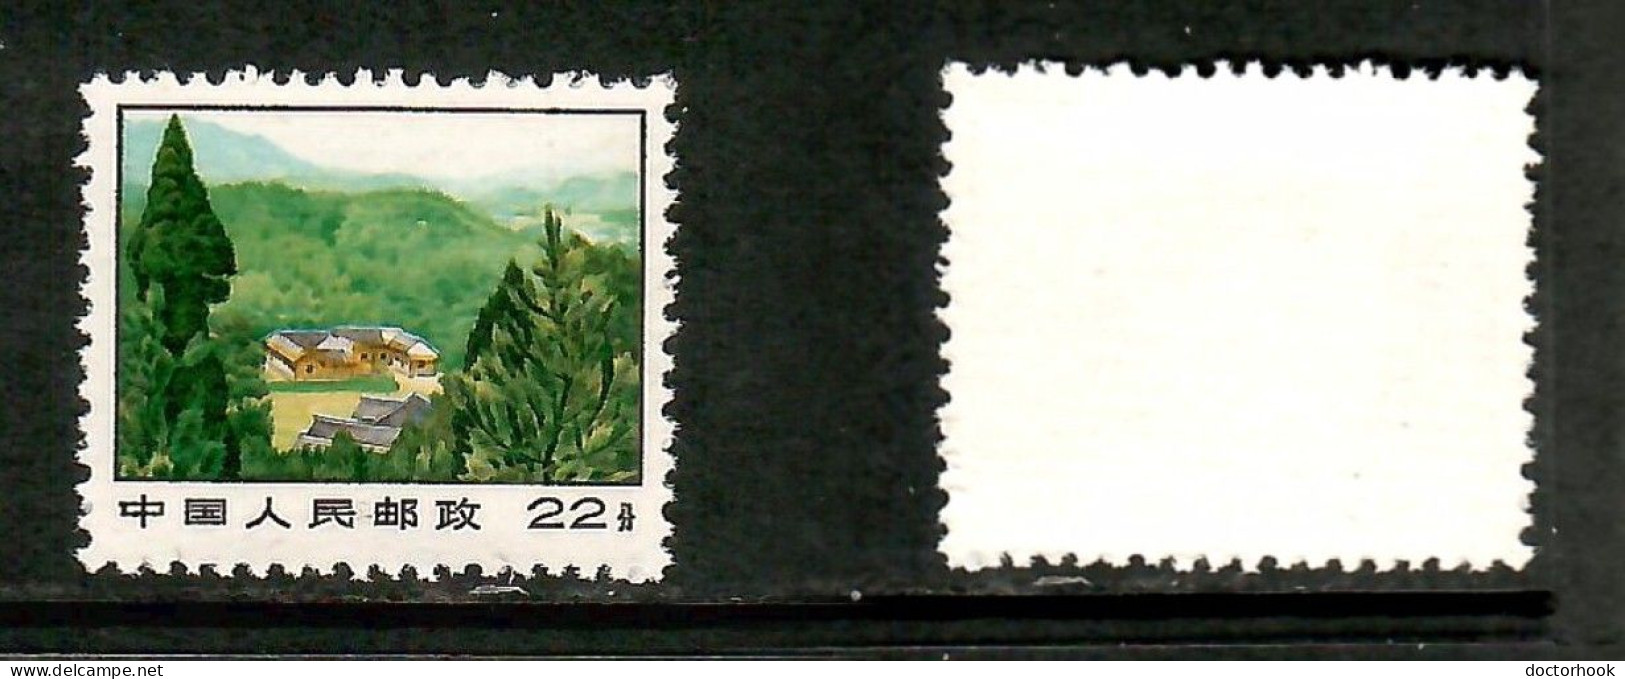 PEOPLES REPUBLIC Of CHINA   Scott # 1032* MINT NO GUM AS ISSUED (CONDITION AS PER SCAN) (Stamp Scan # 1012-8) - Unused Stamps